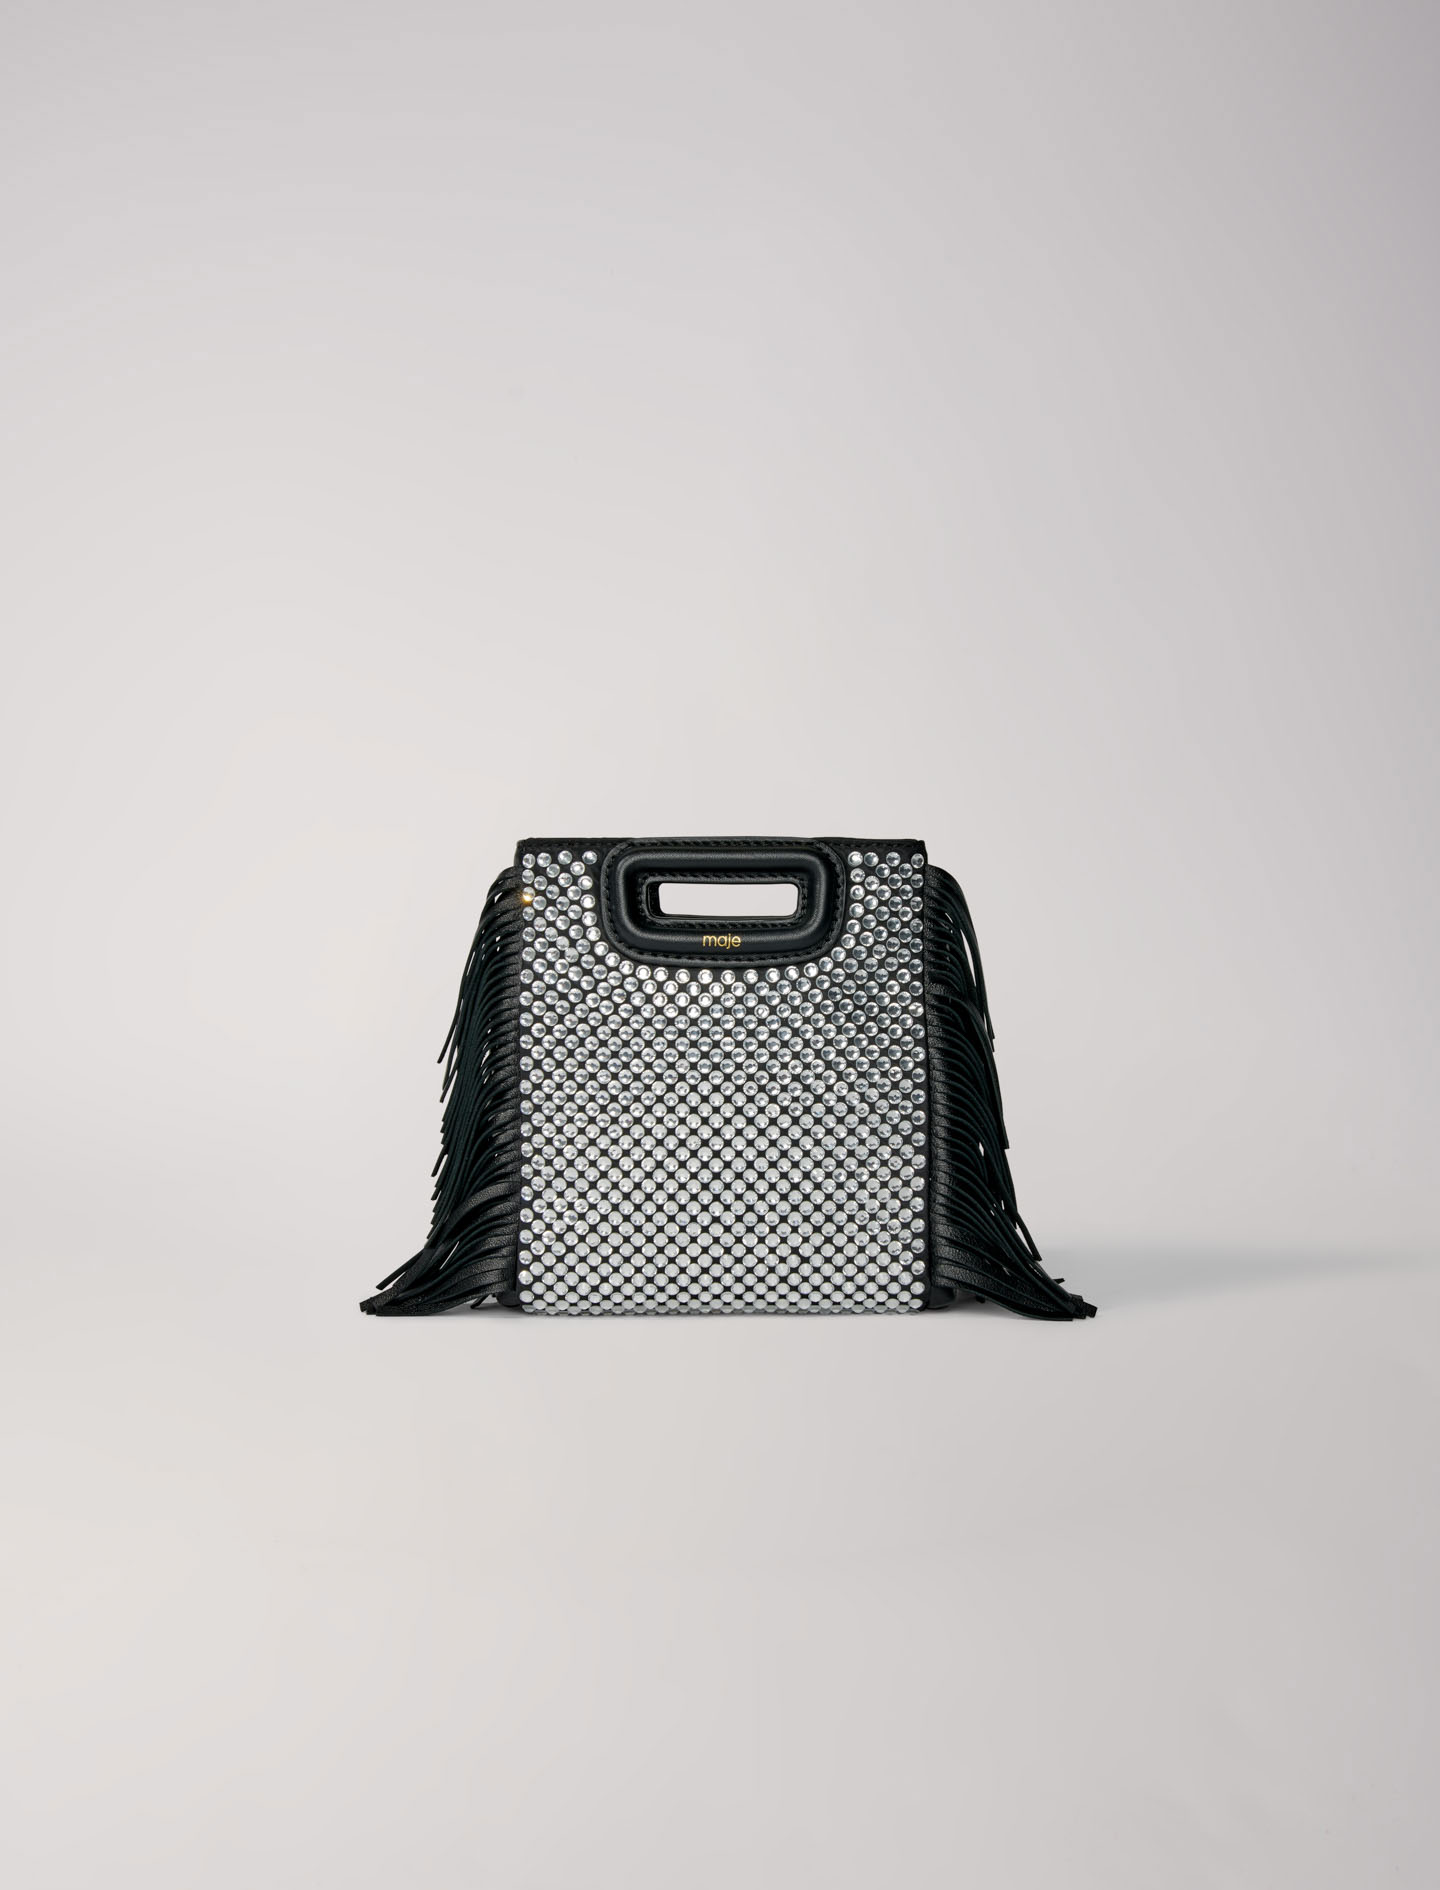 Mixte's polyester Lining: M mini leather bag with rhinestones for Fall/Winter, size Mixte-All Bags-OS (ONE SIZE), in color Black / Black